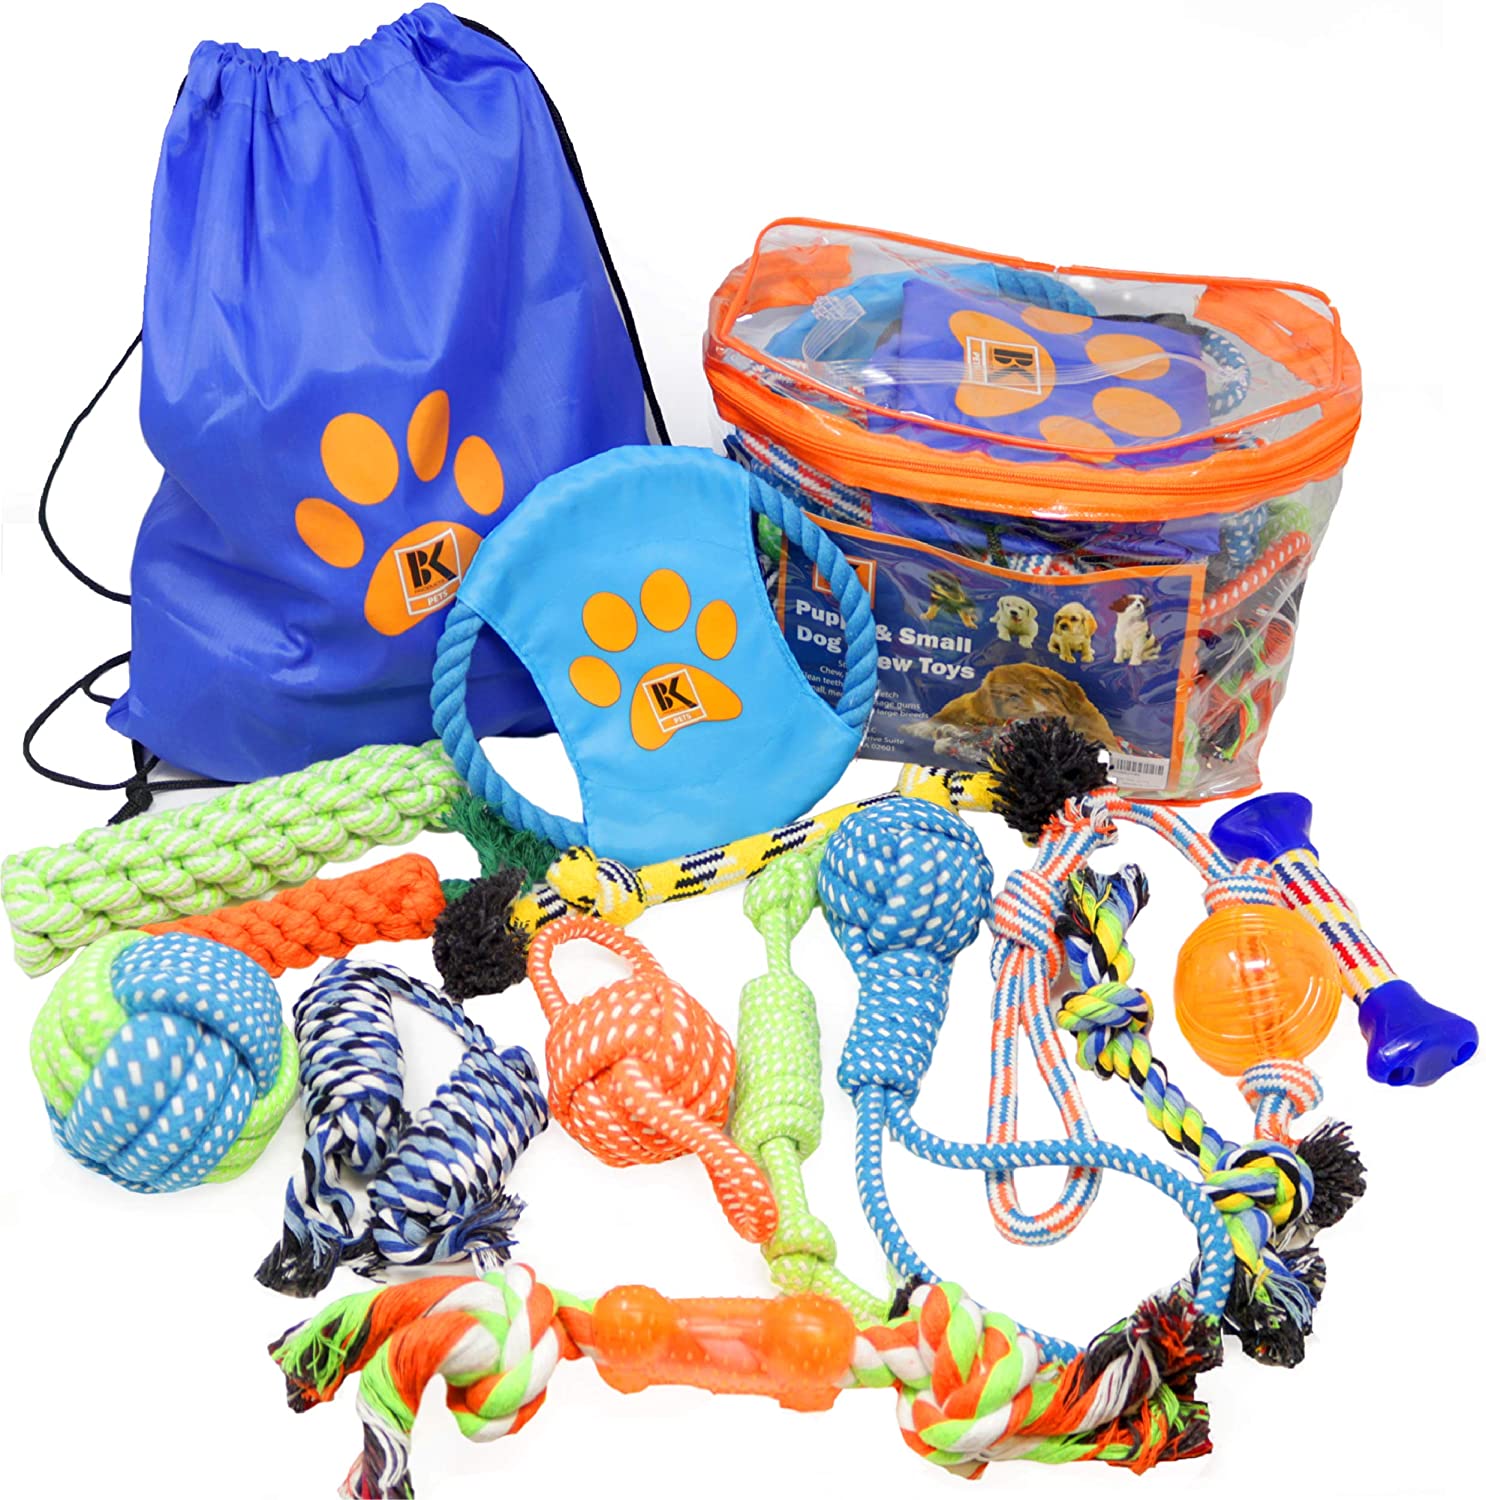 Dog Toys - Set of 13 Dog Chew Toys for Puppy and Small Dogs  BK - image 1 of 8